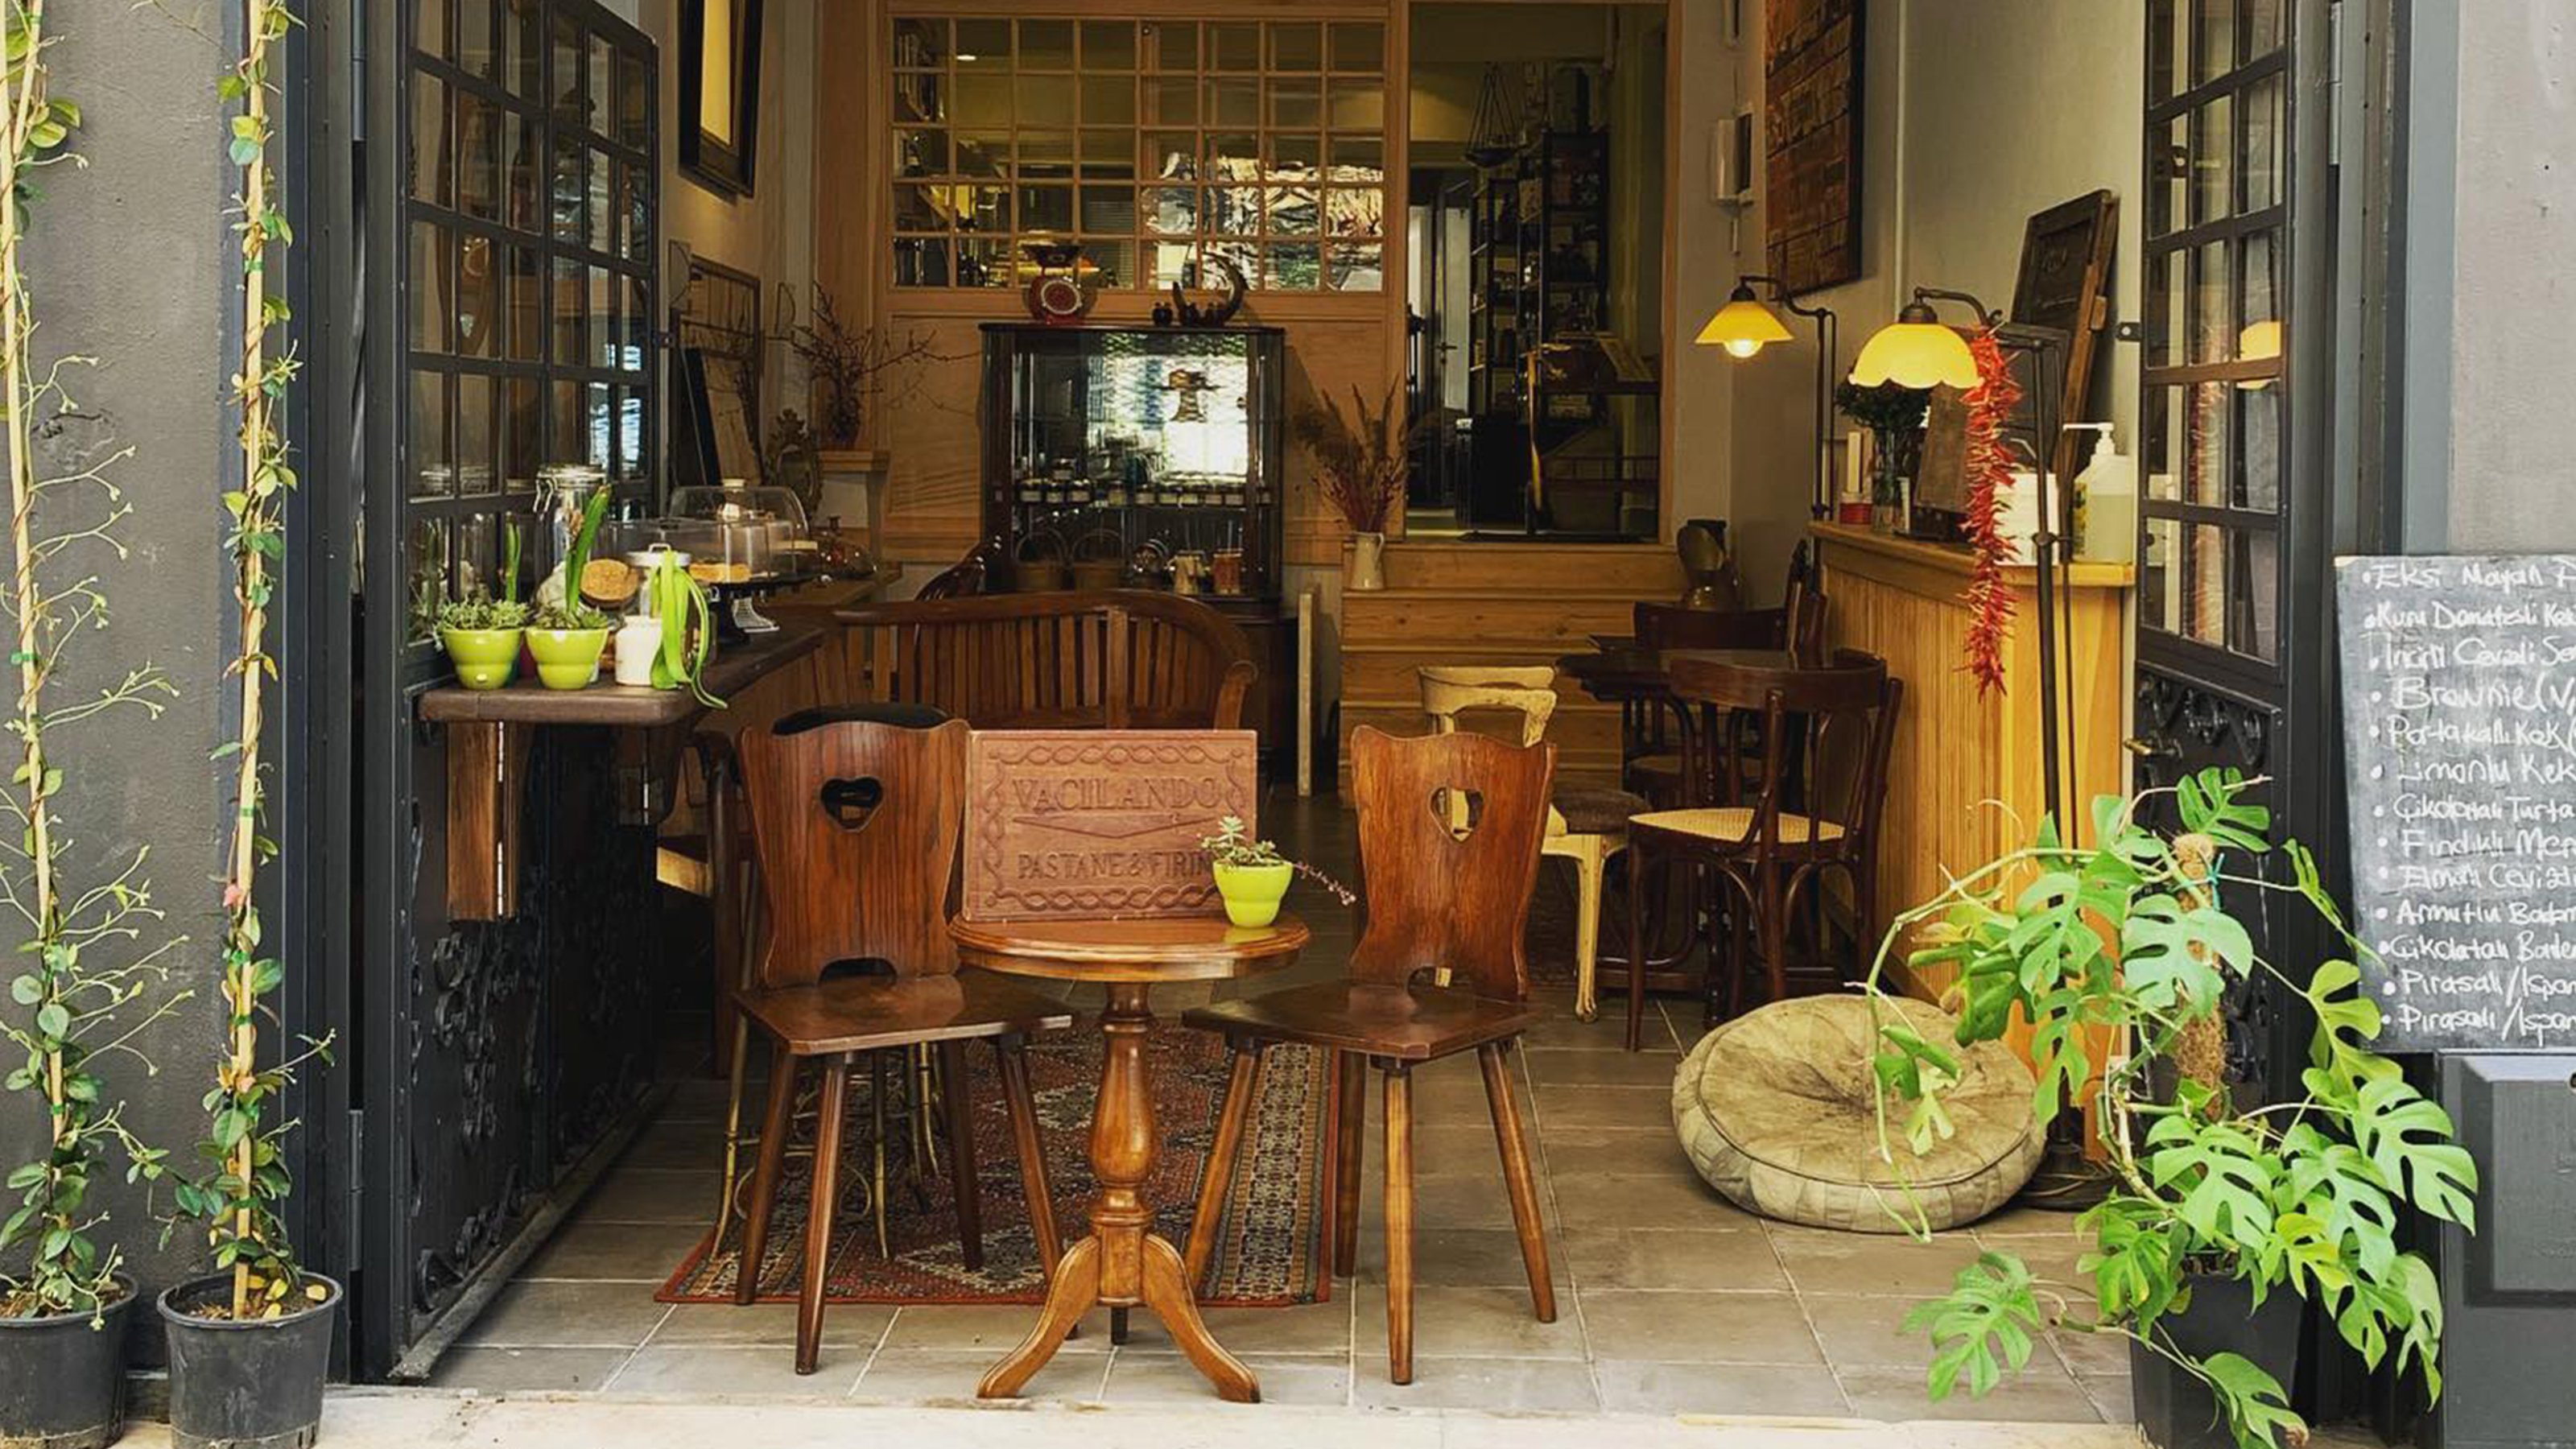 Interior view of the cafe with brown, wood and green plants in its design.